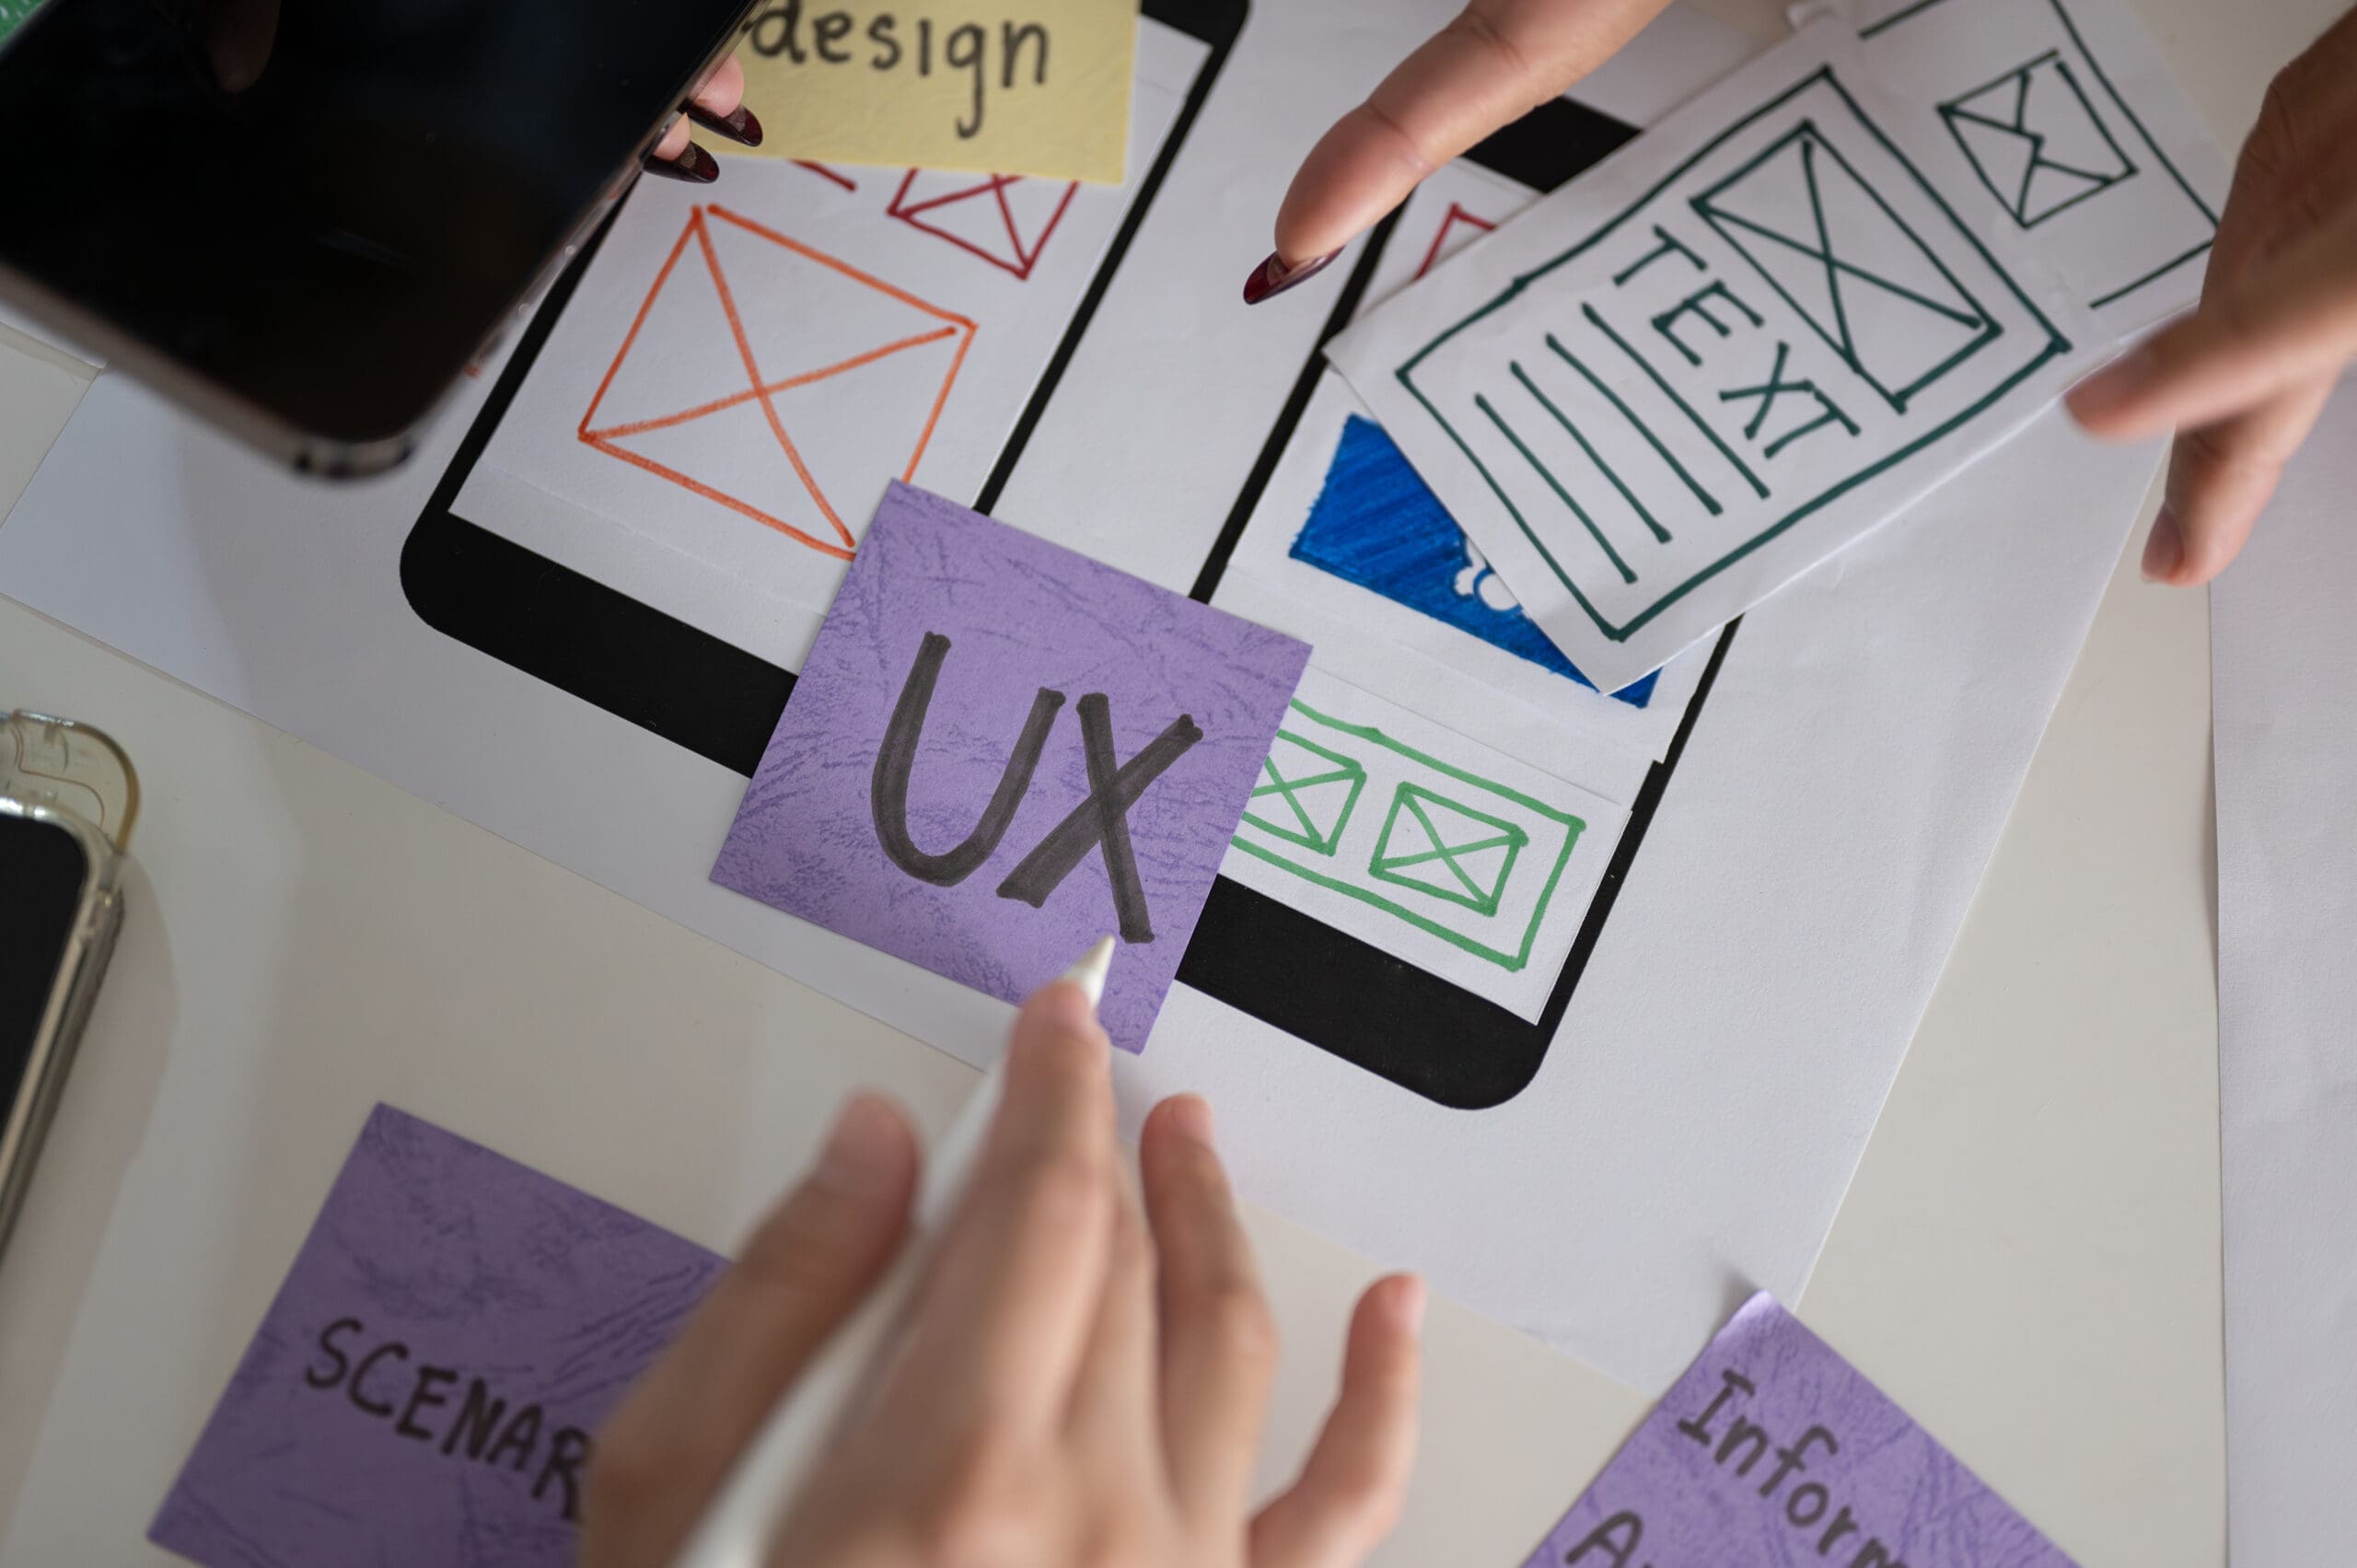 Fingers pointing at a purple paper with the word ux on it